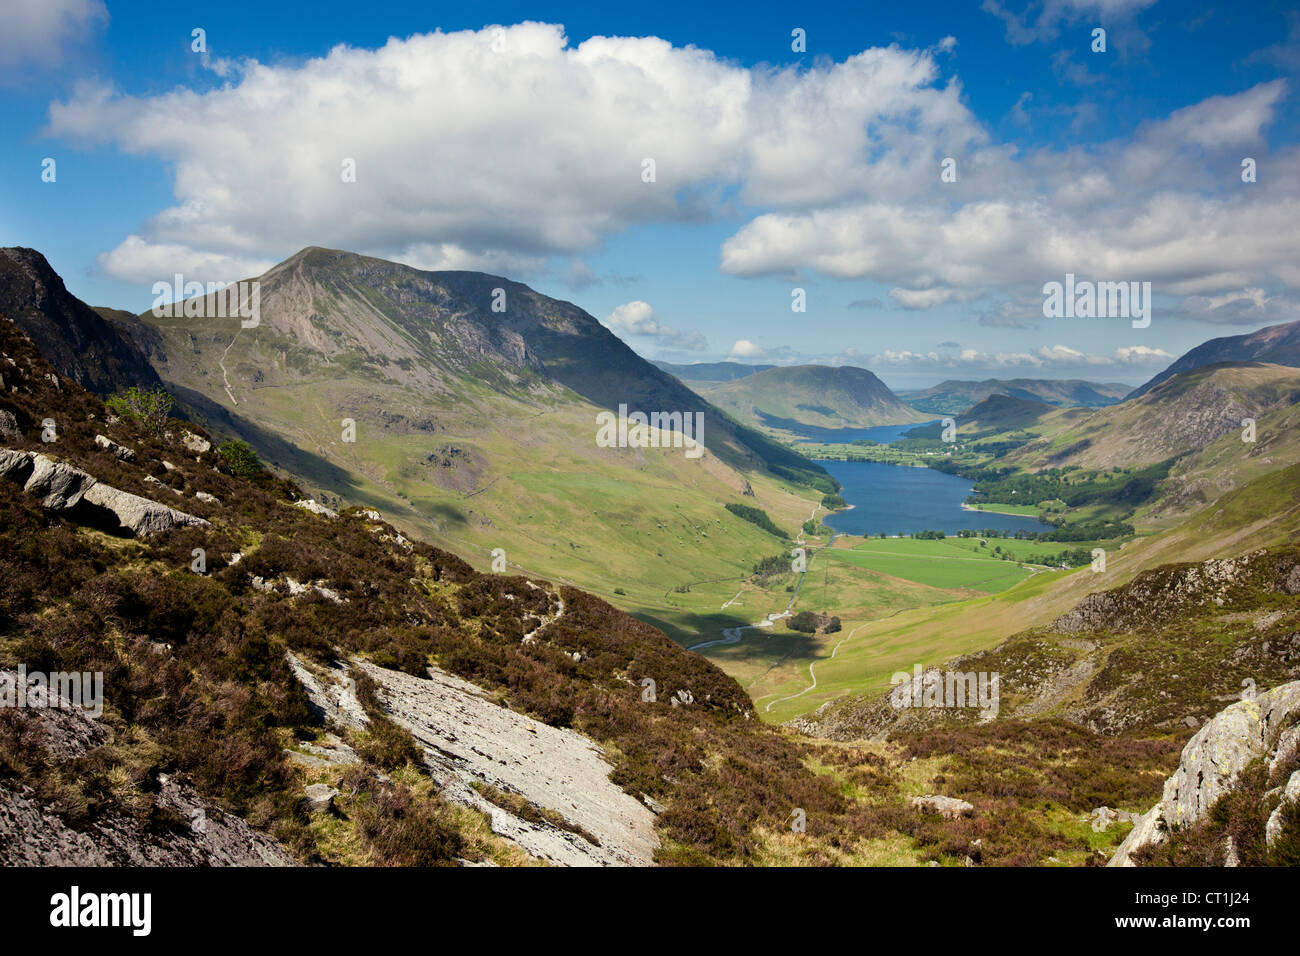 Buttermere Lake And Crummock Water With Red Pike And Mountain, The Lake District Cumbria Lakeland England United Kingdom Stock Photo